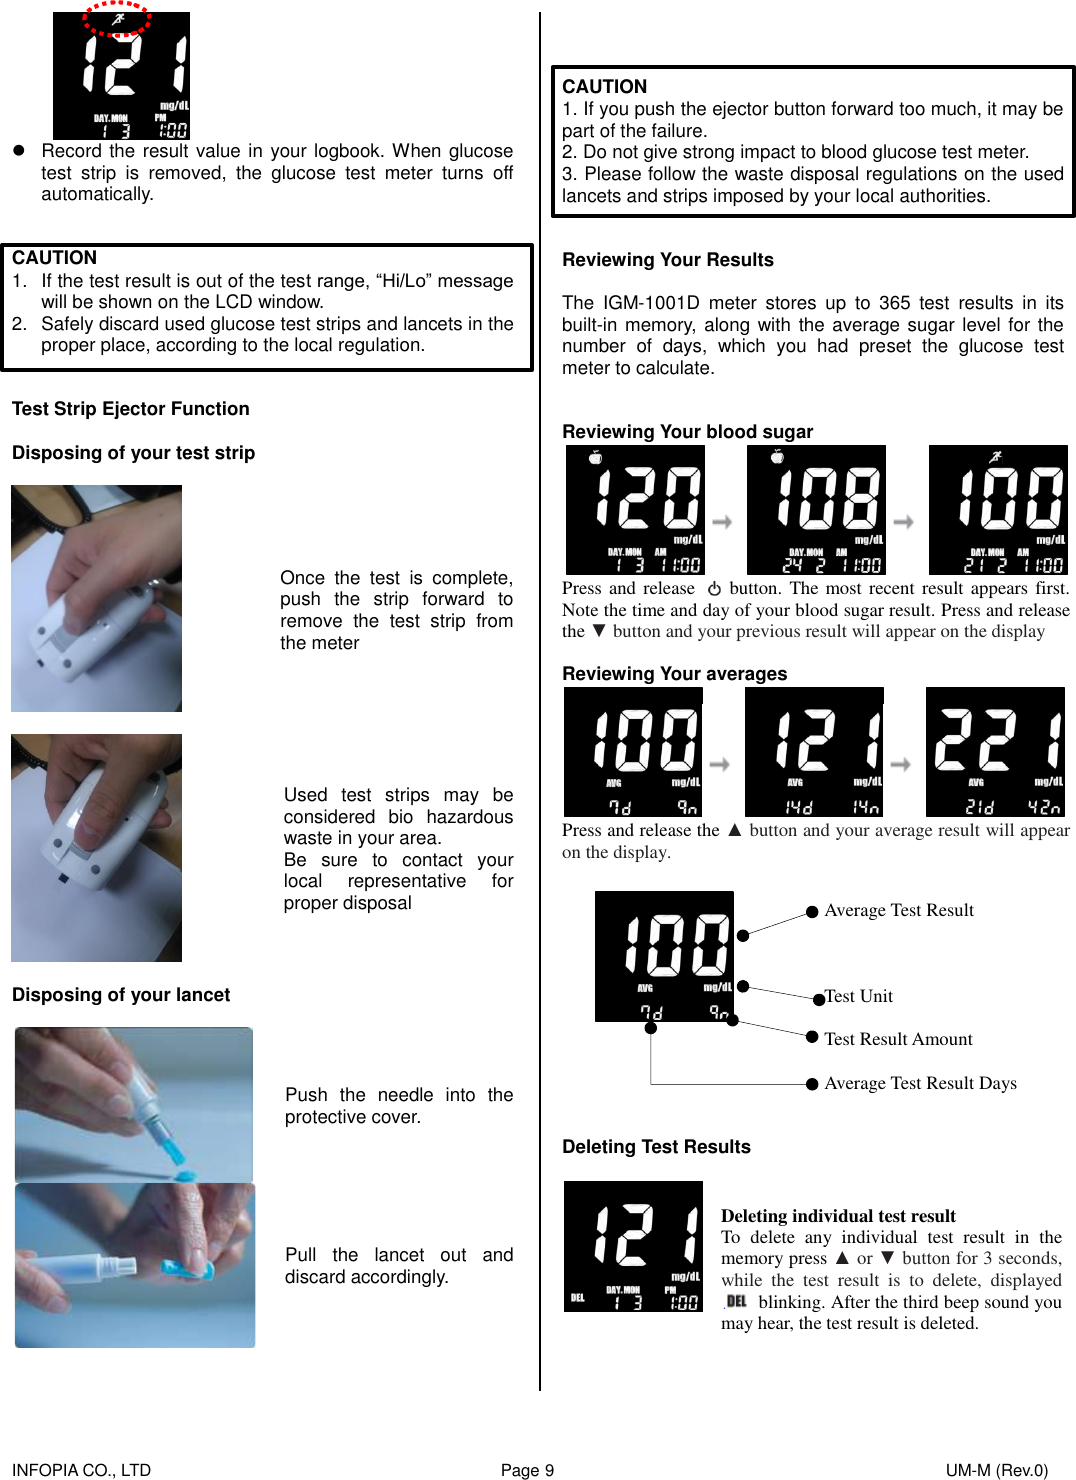    INFOPIA CO., LTD                                                                                    Page 9                                                                                              UM-M (Rev.0)     Record the result value in your logbook. When glucose test  strip  is  removed,  the  glucose  test  meter  turns  off automatically.   CAUTION 1.  If the test result is out of the test range, “Hi/Lo” message will be shown on the LCD window. 2.  Safely discard used glucose test strips and lancets in the proper place, according to the local regulation.   Test Strip Ejector Function  Disposing of your test strip    Once  the  test  is  complete, push  the  strip  forward  to remove  the  test  strip  from the meter  Used  test  strips  may  be considered  bio  hazardous waste in your area. Be  sure  to  contact  your local  representative  for proper disposal  Disposing of your lancet   Push  the  needle  into  the protective cover.  Pull  the  lancet  out  and discard accordingly.      CAUTION 1. If you push the ejector button forward too much, it may be part of the failure. 2. Do not give strong impact to blood glucose test meter. 3. Please follow the waste disposal regulations on the used lancets and strips imposed by your local authorities.   Reviewing Your Results  The  IGM-1001D  meter  stores  up  to  365  test  results  in  its built-in memory,  along with the average sugar level for the number  of  days,  which  you  had  preset  the  glucose  test meter to calculate.   Reviewing Your blood sugar  Press and release    button.  The most recent result appears first. Note the time and day of your blood sugar result. Press and release the ▼ button and your previous result will appear on the display  Reviewing Your averages  Press and release the ▲ button and your average result will appear on the display.    Average Test Result    Test Unit  Test Result Amount  Average Test Result Days   Deleting Test Results   Deleting individual test result To  delete  any  individual  test  result  in  the memory press ▲ or ▼ button for 3 seconds, while  the  test  result  is  to  delete,  displayed   blinking. After the third beep sound you may hear, the test result is deleted. 